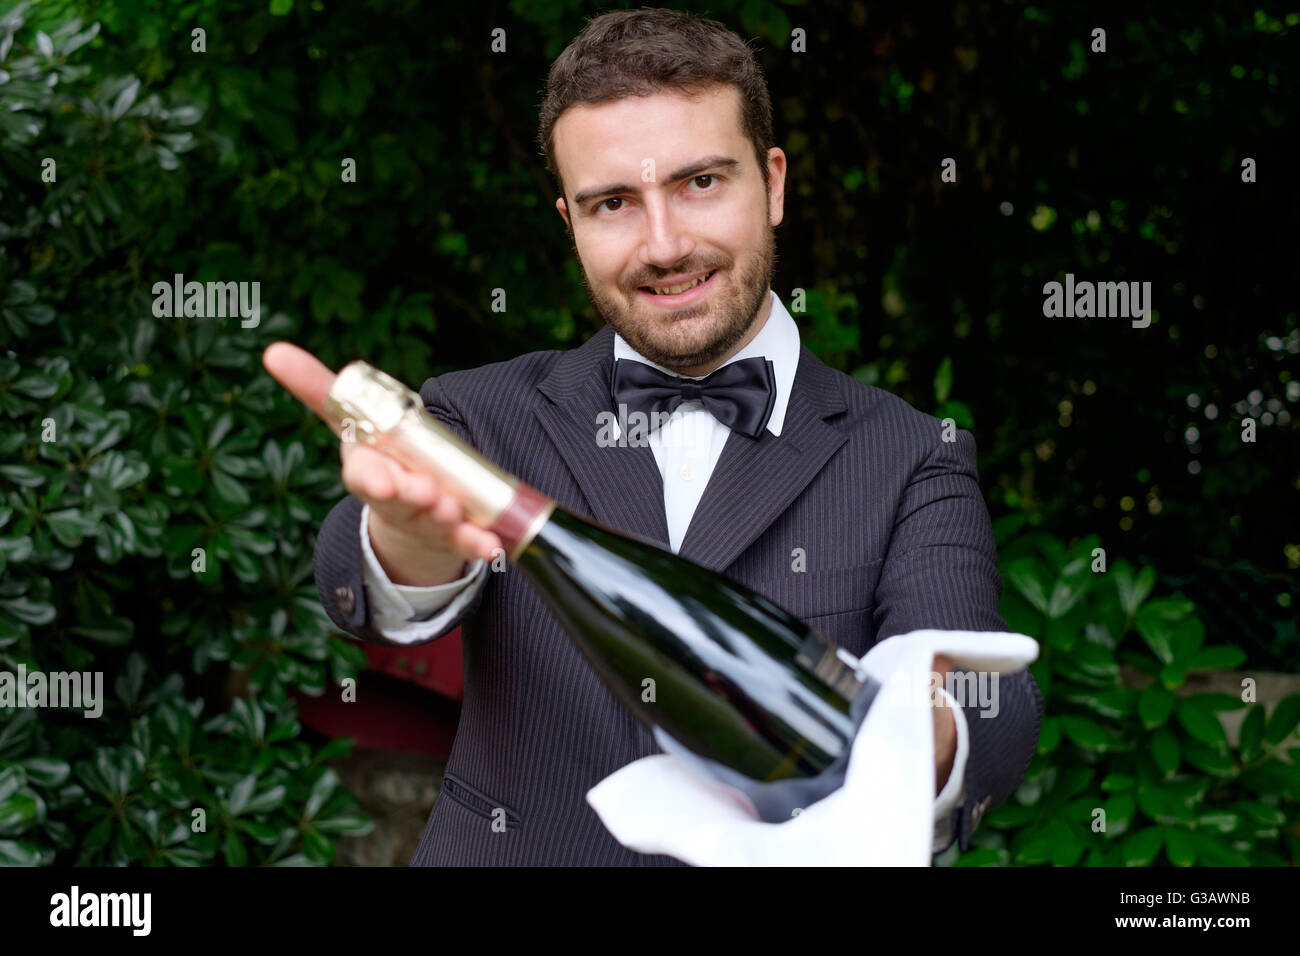 professional waiter in uniform is serving champagne Stock Photo